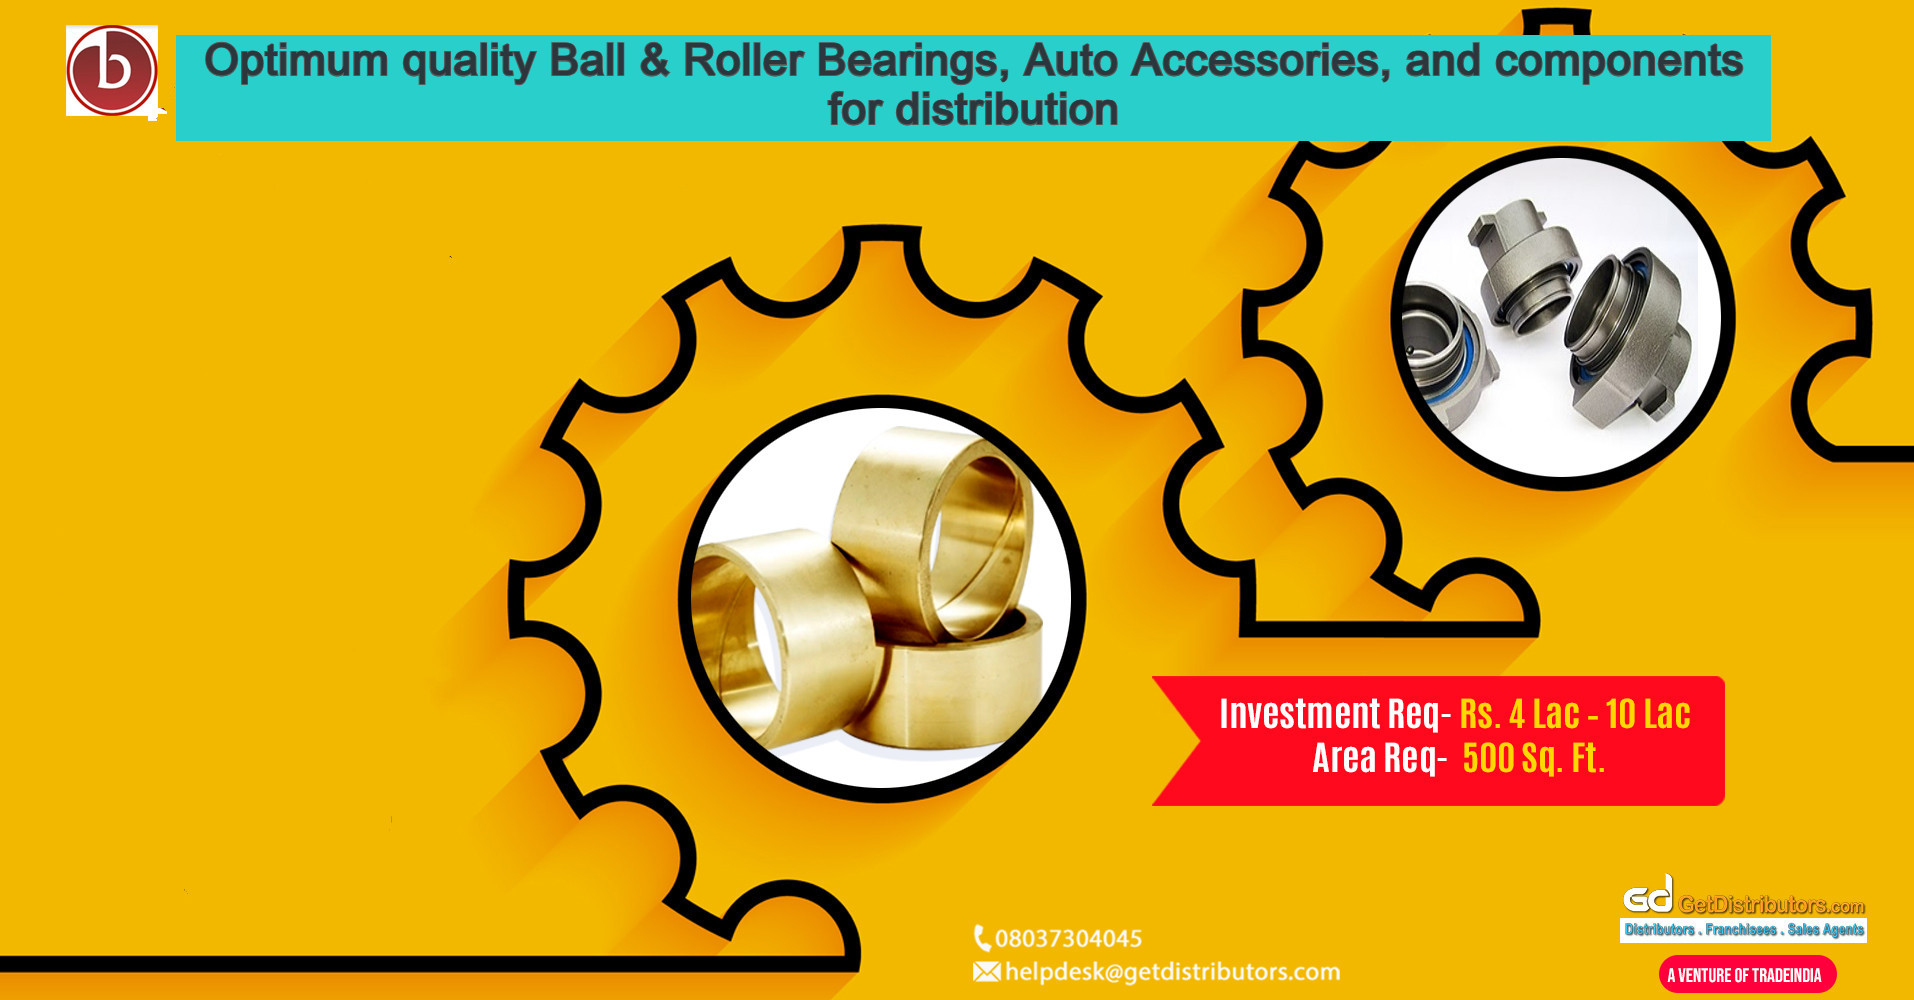 Optimum quality Ball & Roller Bearings, Auto Accessories, and components for distribution